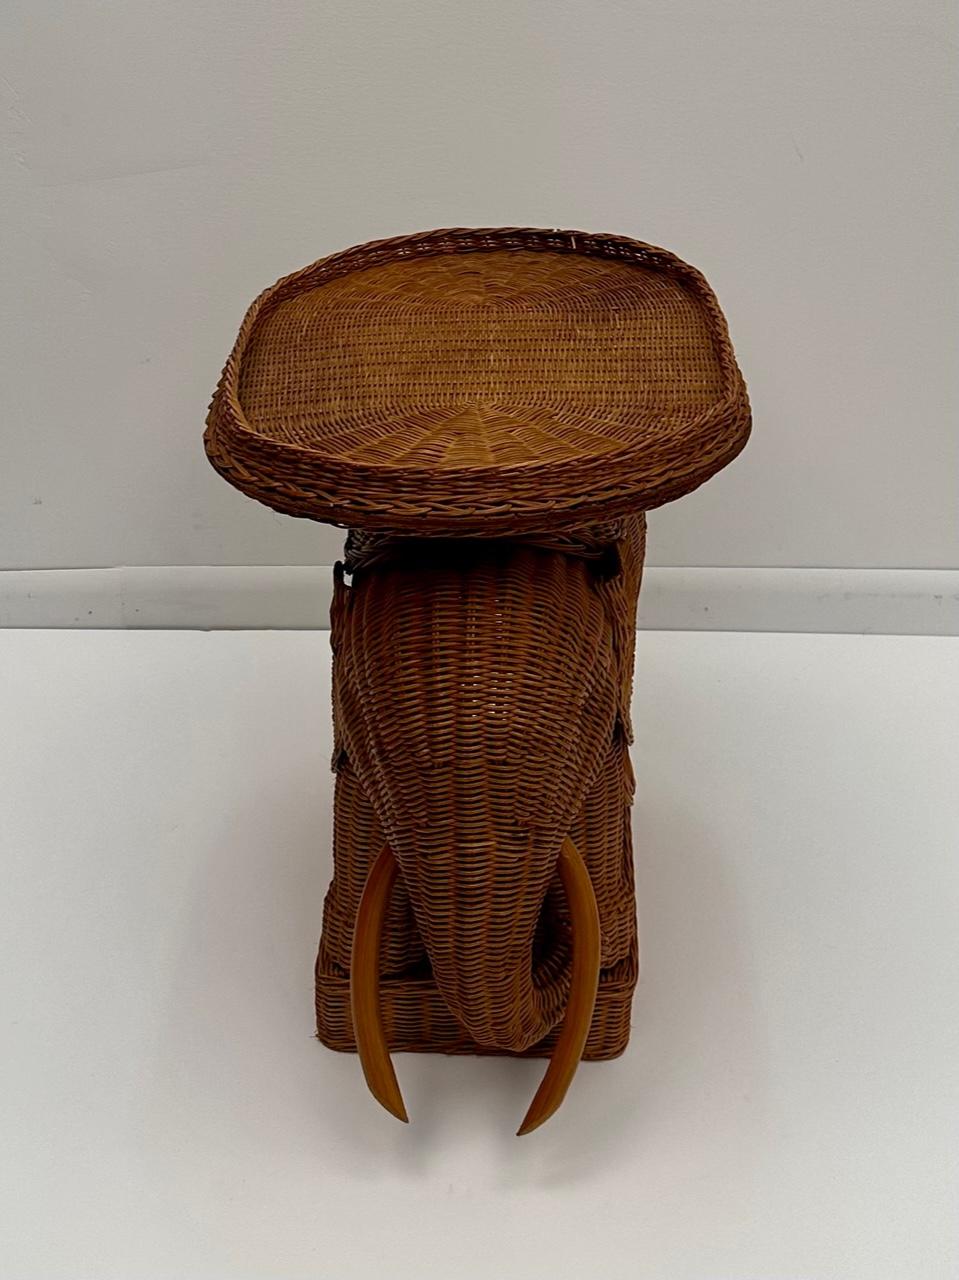 Stylish Mid-Century Modern natural wicker end table in the shape of an elephant having oval tray top (22.5 L x 16 D).